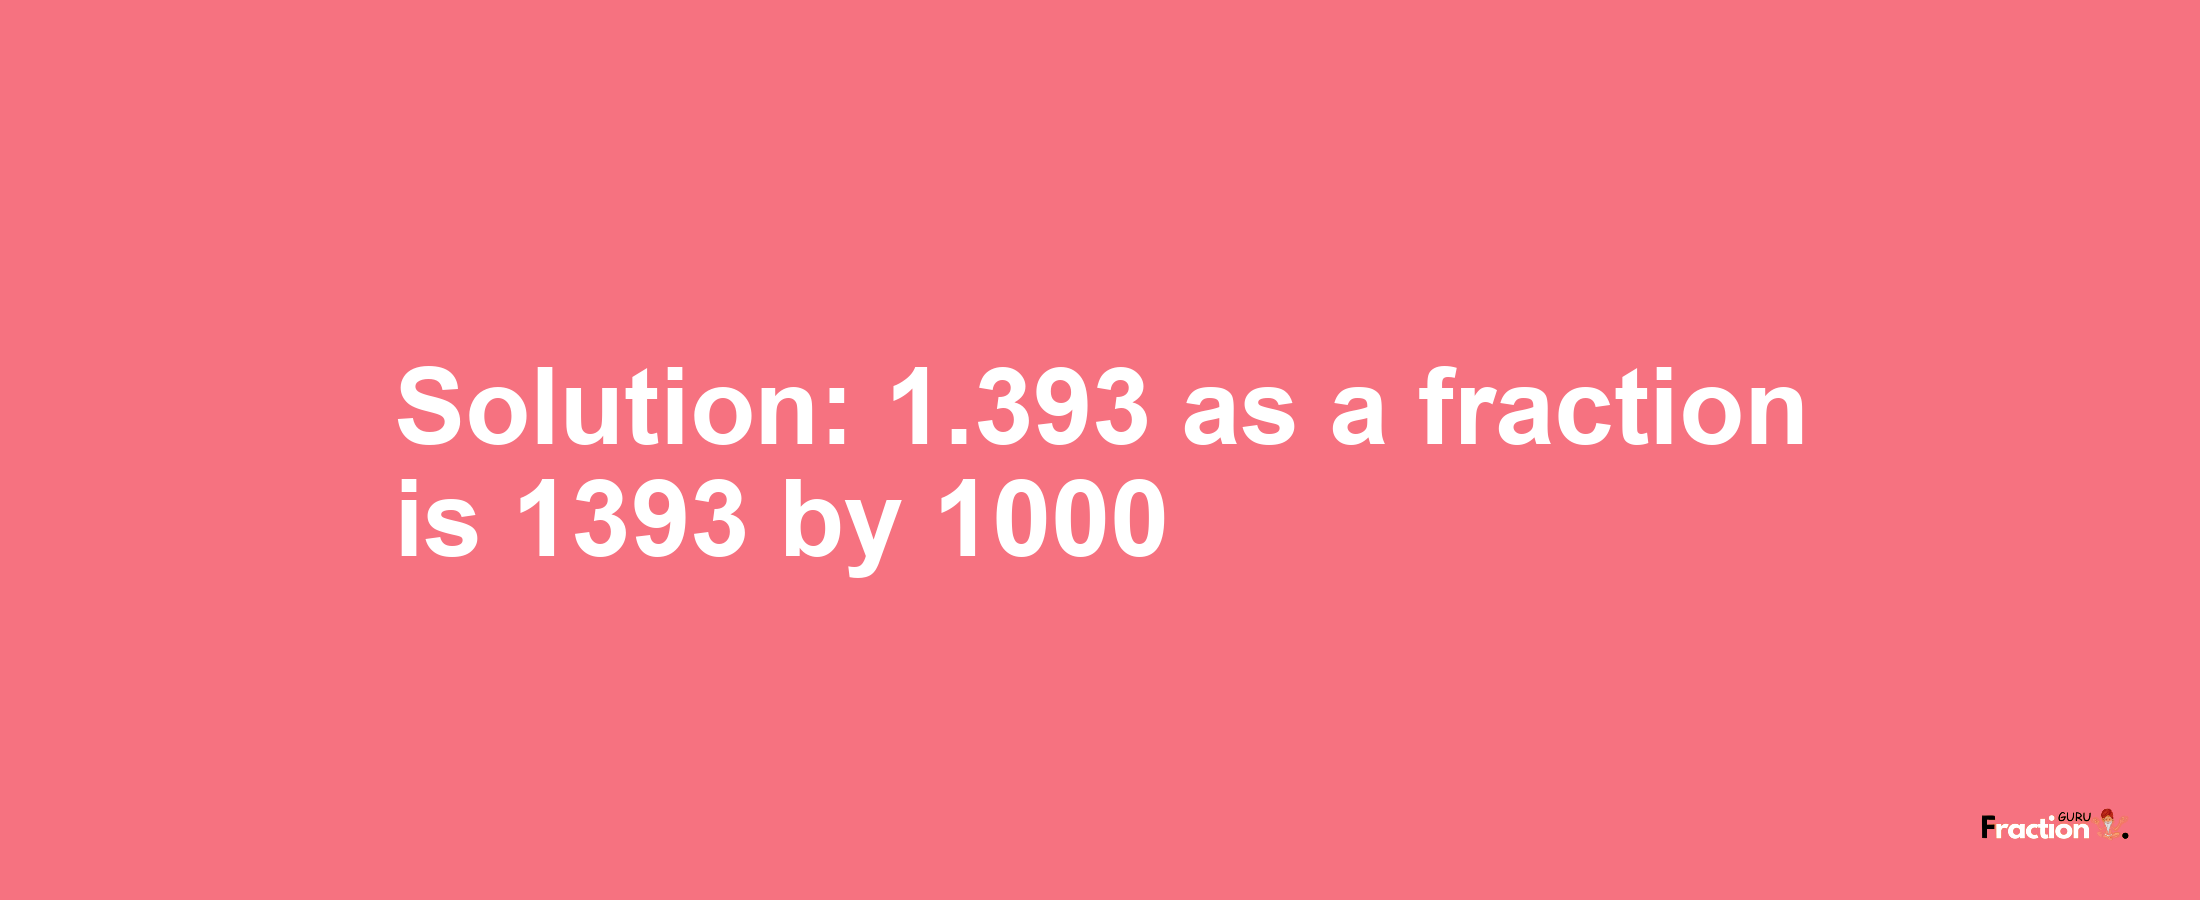 Solution:1.393 as a fraction is 1393/1000